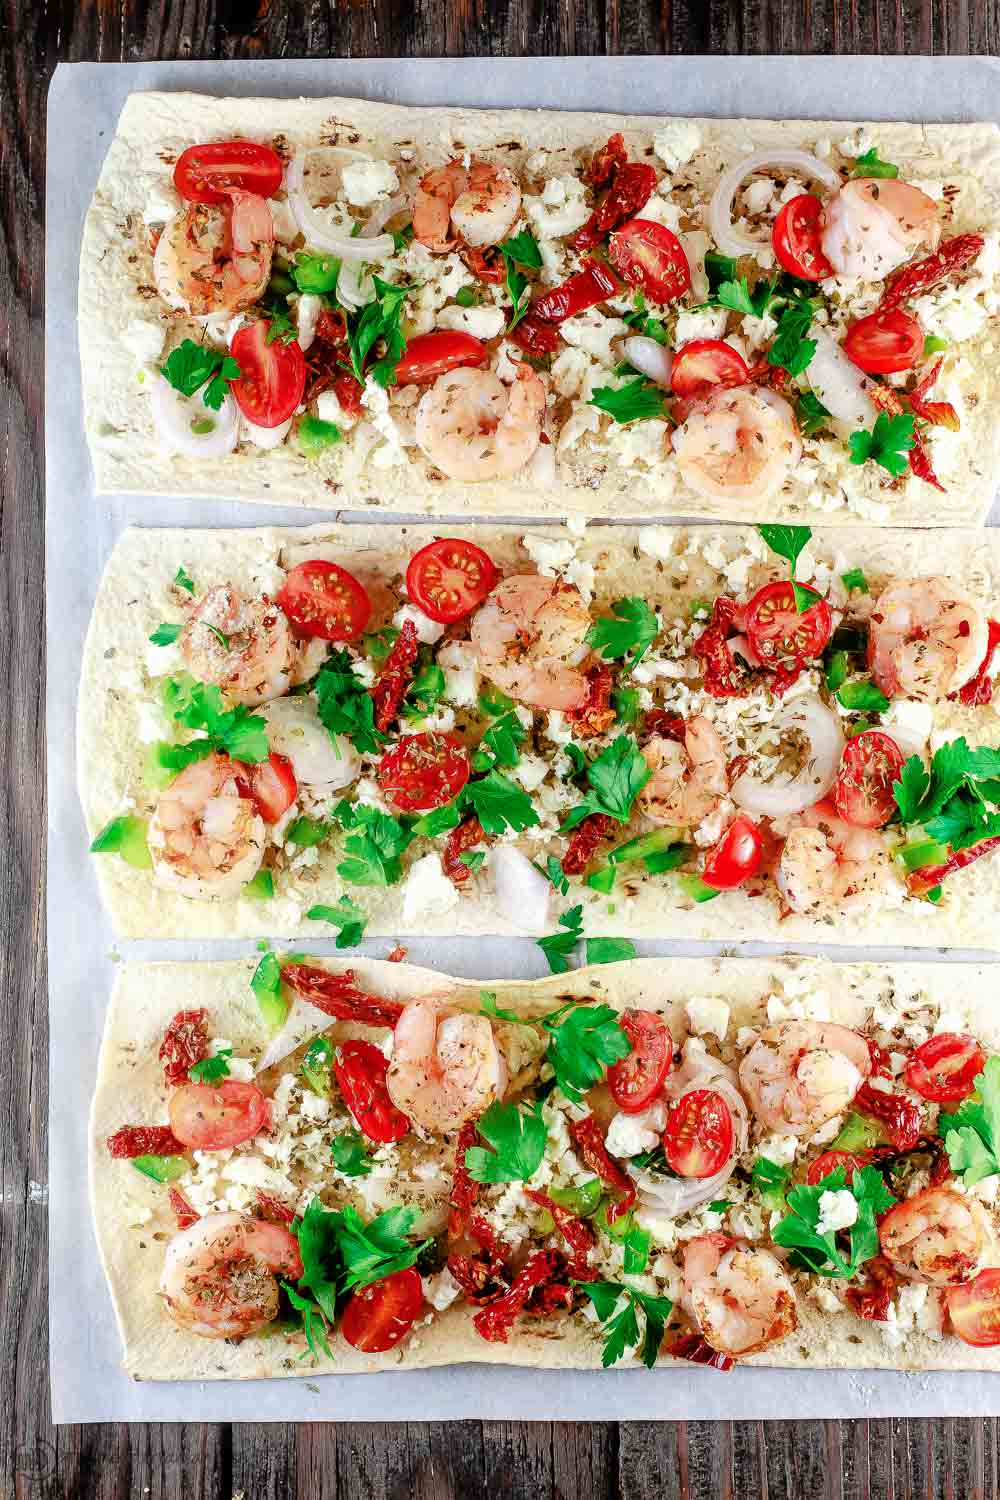 Mediterranean Shrimp Flatbread Pizza | The Mediterranean Dish. Easiest ever shrimp pizza on flatbread with Mediterranean favorites like feta, shallots, and sun-dried tomatoes. Takes less than 15 minutes start-to-finish! See the easy recipe on TheMediterraneanDish.com